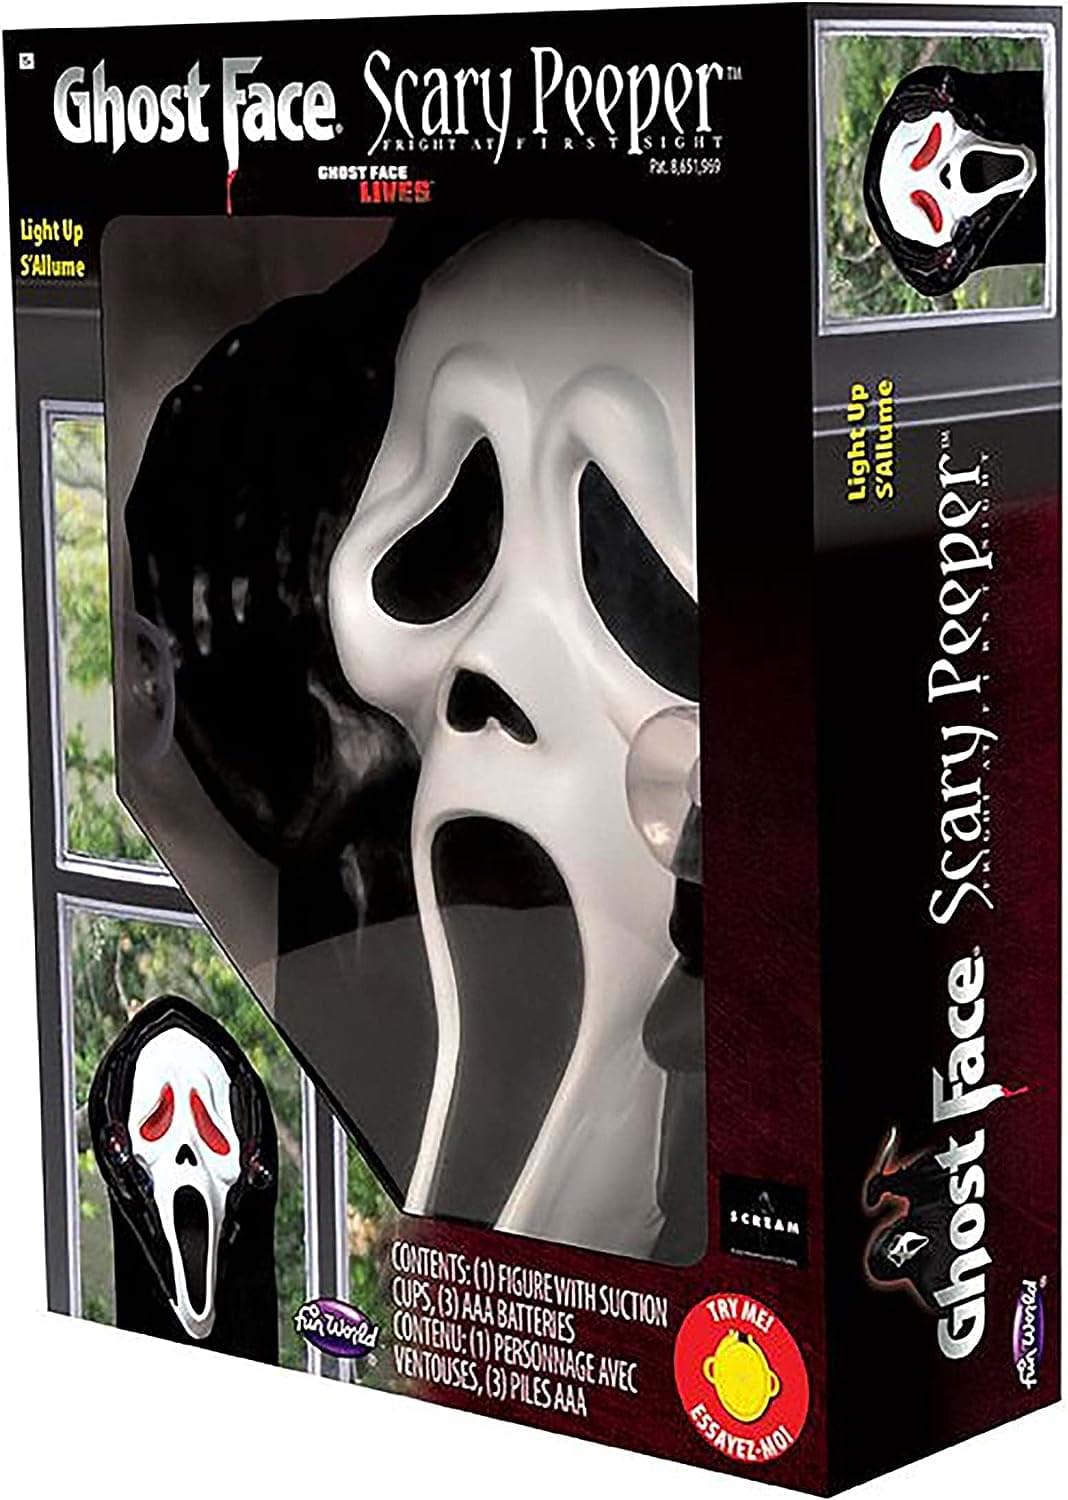 Ghost Face Light Up Scary Peeper Halloween Decor